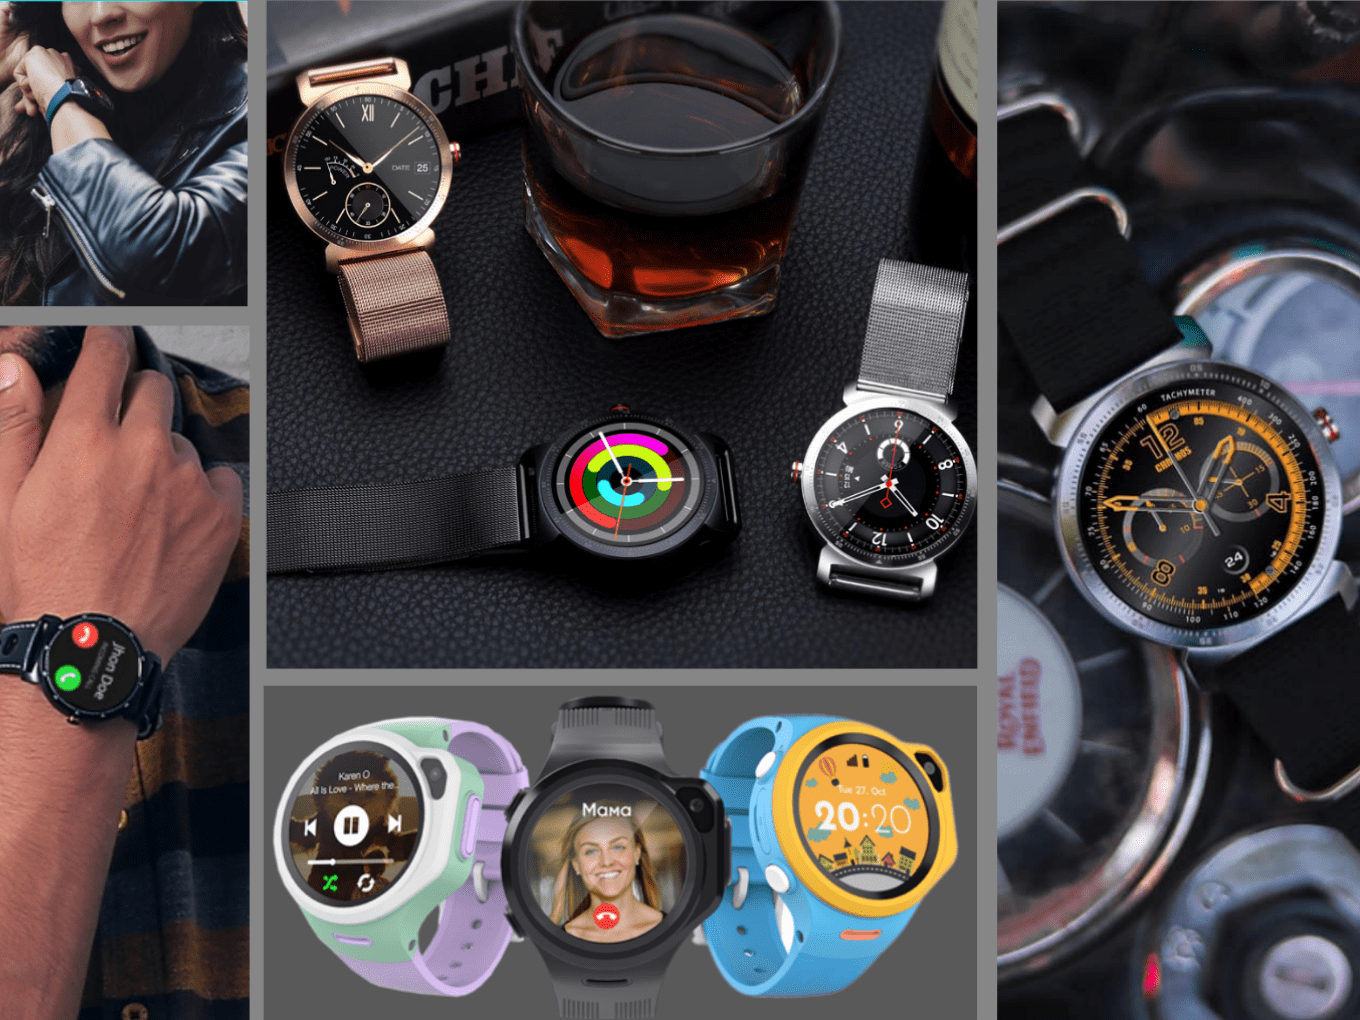 How This Smartwatch Startup Is Tapping Into A $226 Mn Smartwatch Market With Feature-Heavy Products And Affordable Pricing